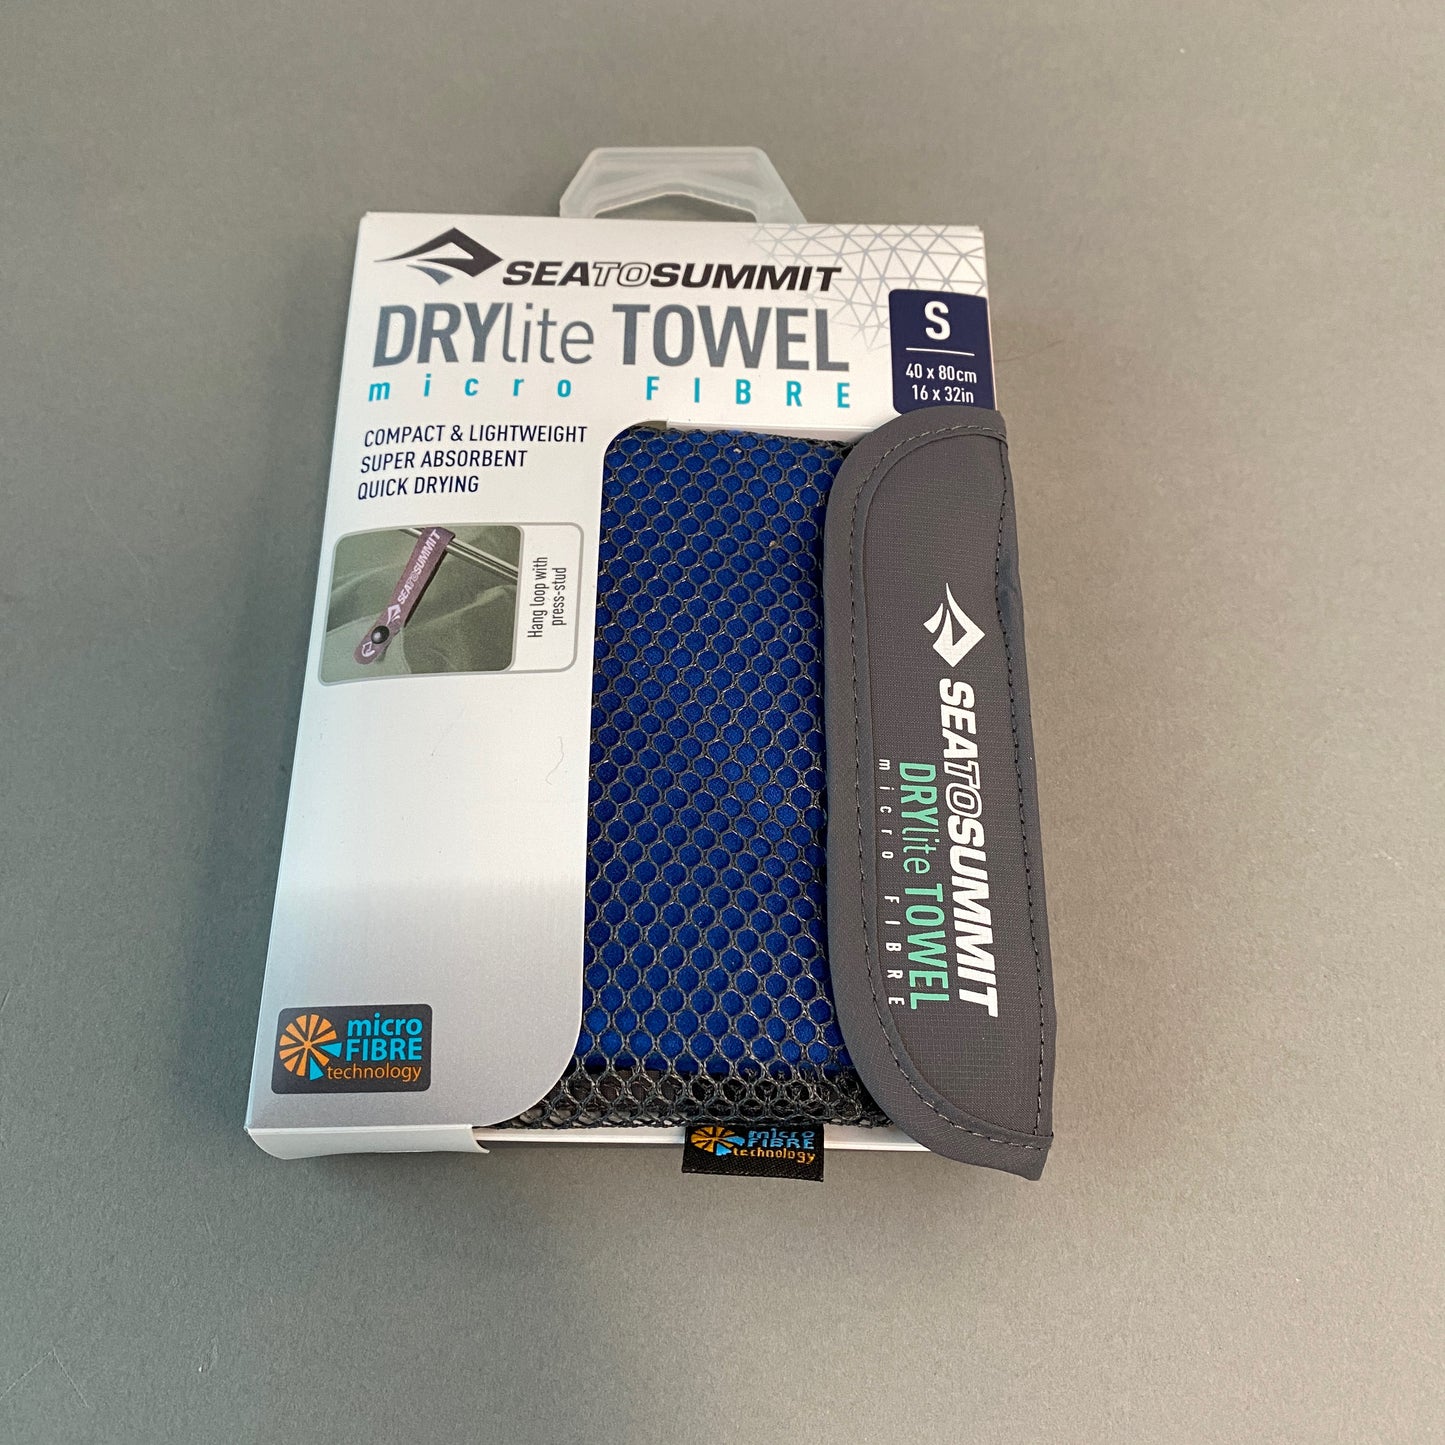 Photo of Drylite Towel from Sea to Summit.  Small blue micro fiber towel in a ventilated pouch